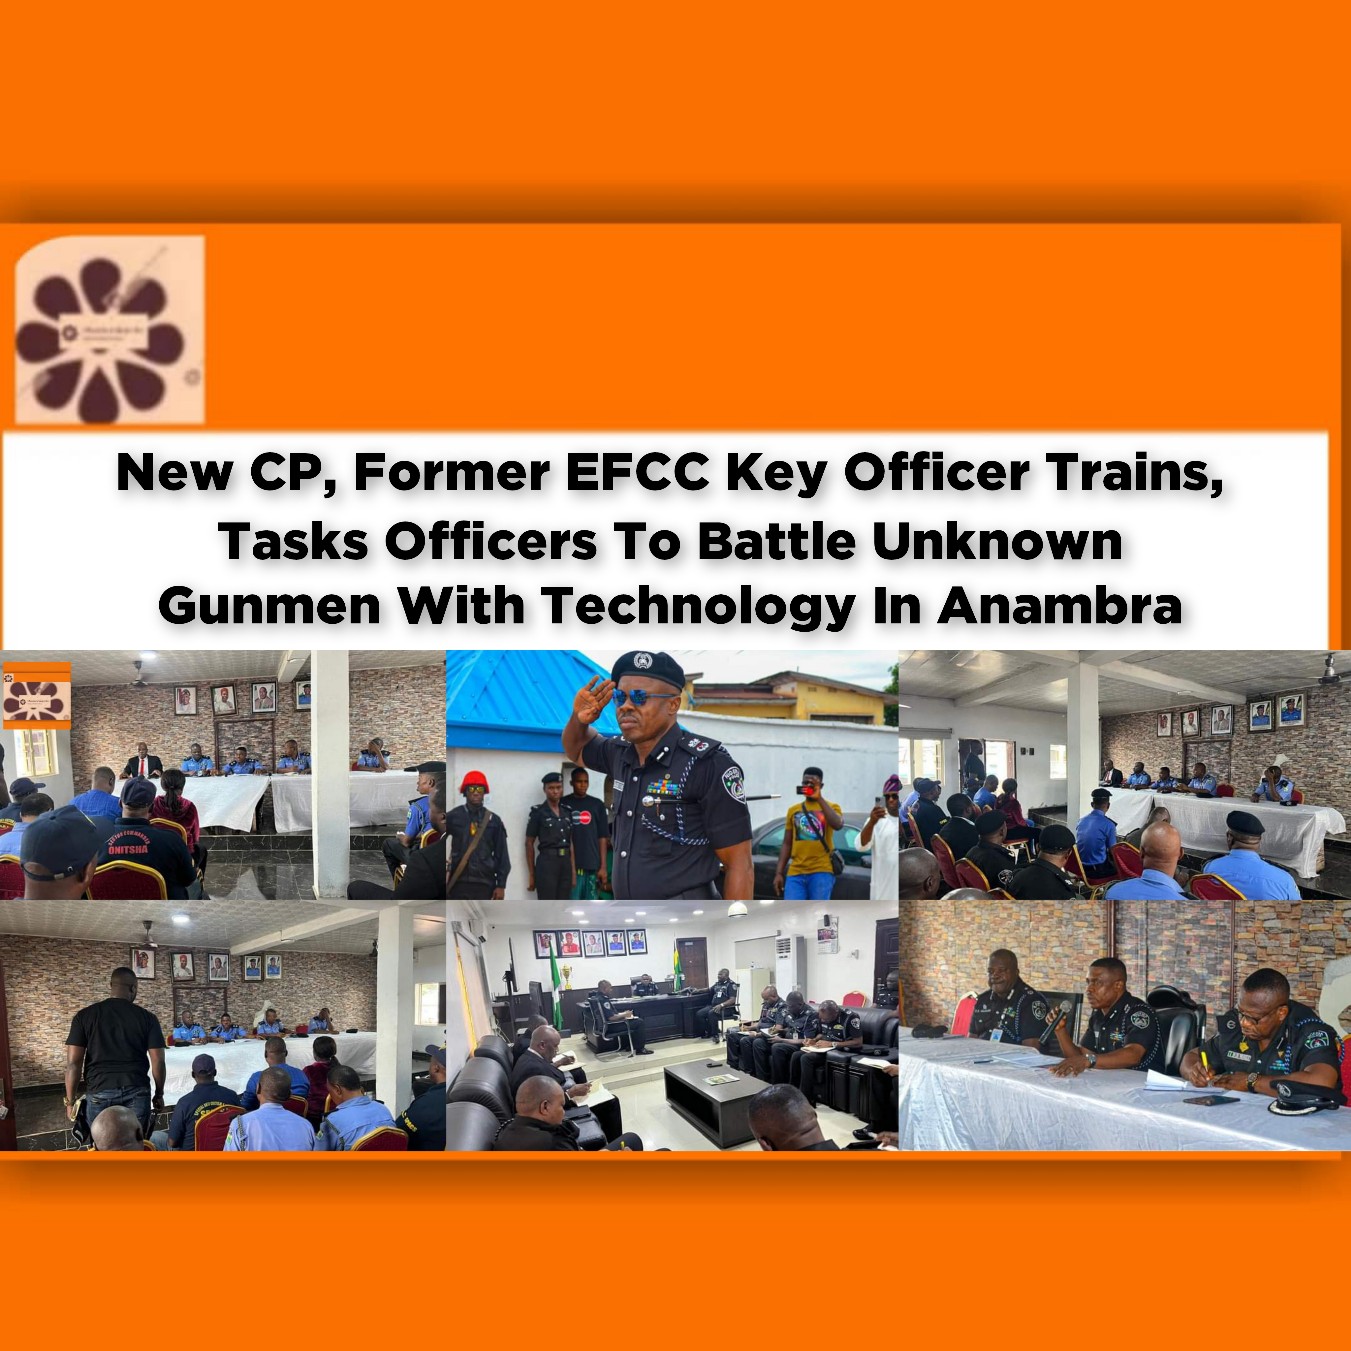 New CP, Former EFCC Key Officer Trains, Tasks Officers To Battle Unknown Gunmen With Technology In Anambra ~ OsazuwaAkonedo #PEPC